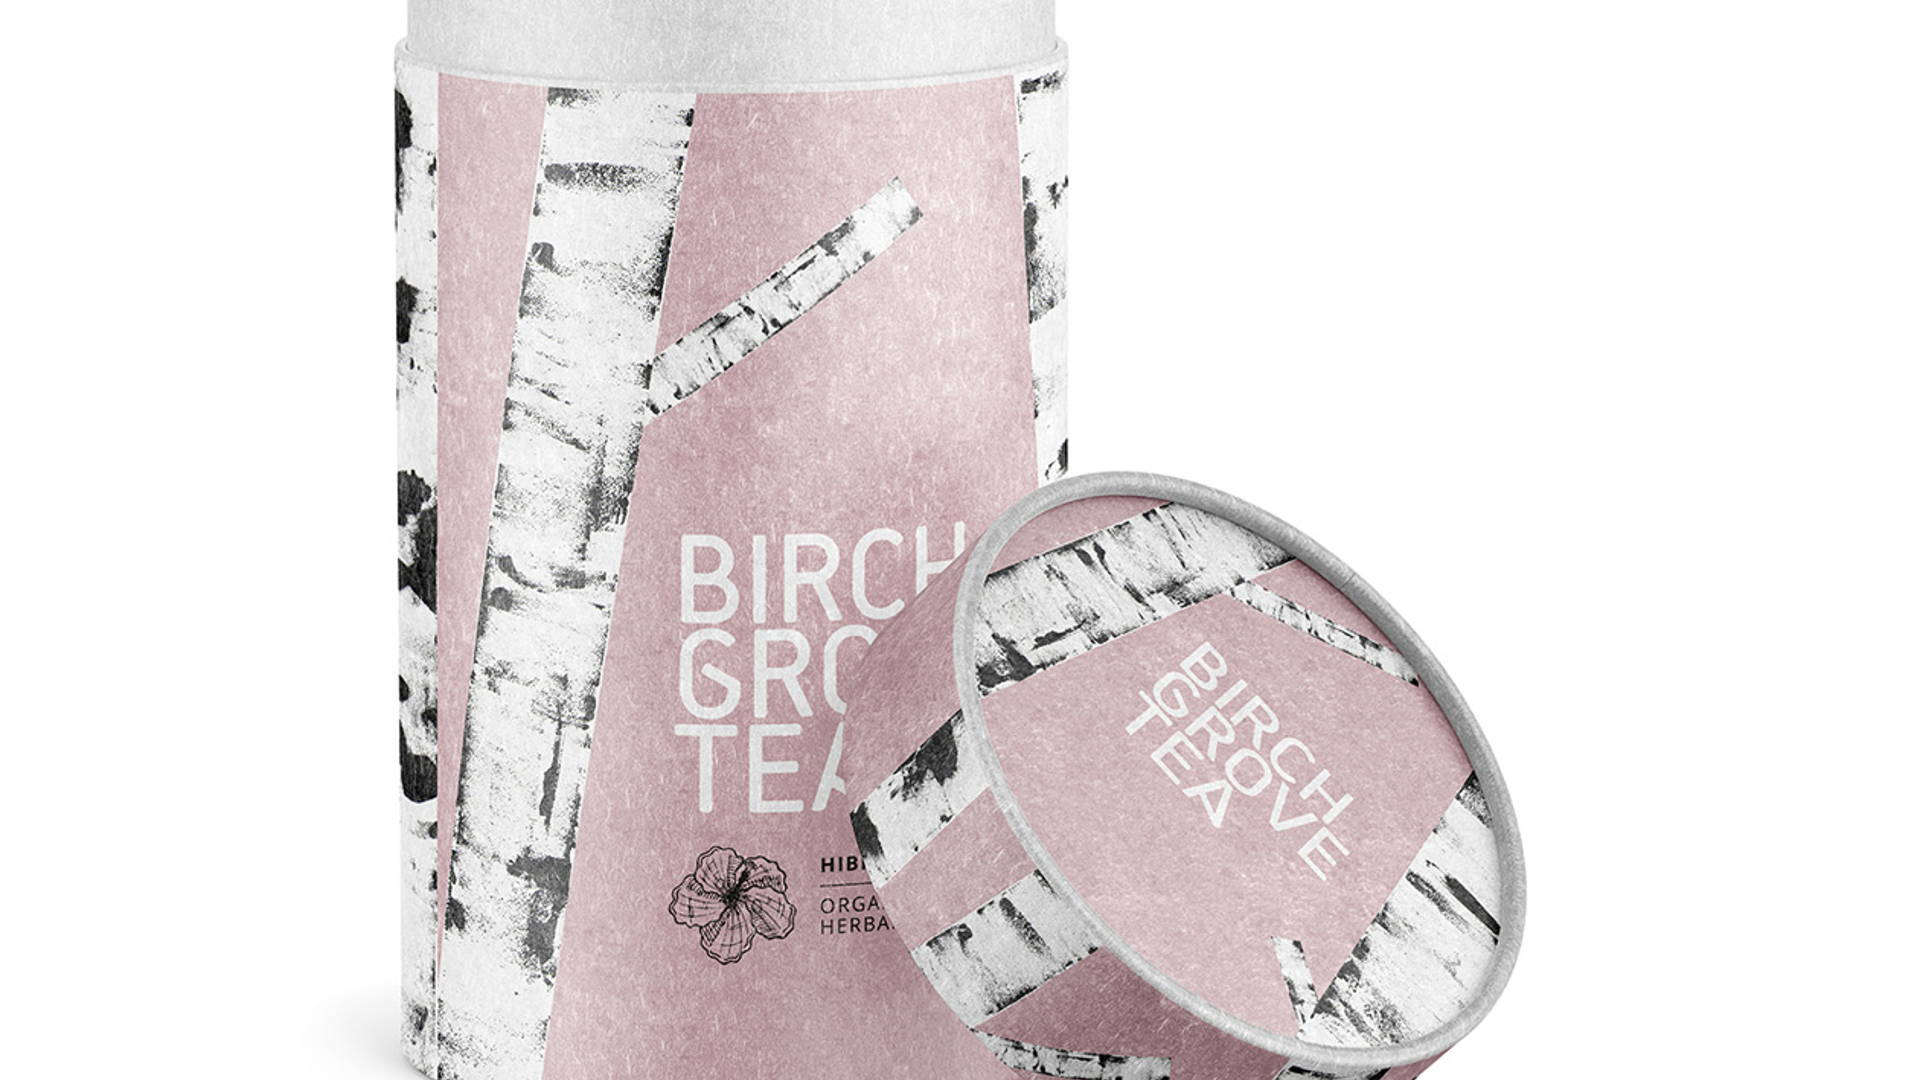 Featured image for Birch Grove Tea's Packaging Comes With a Wonderfully Textured Look